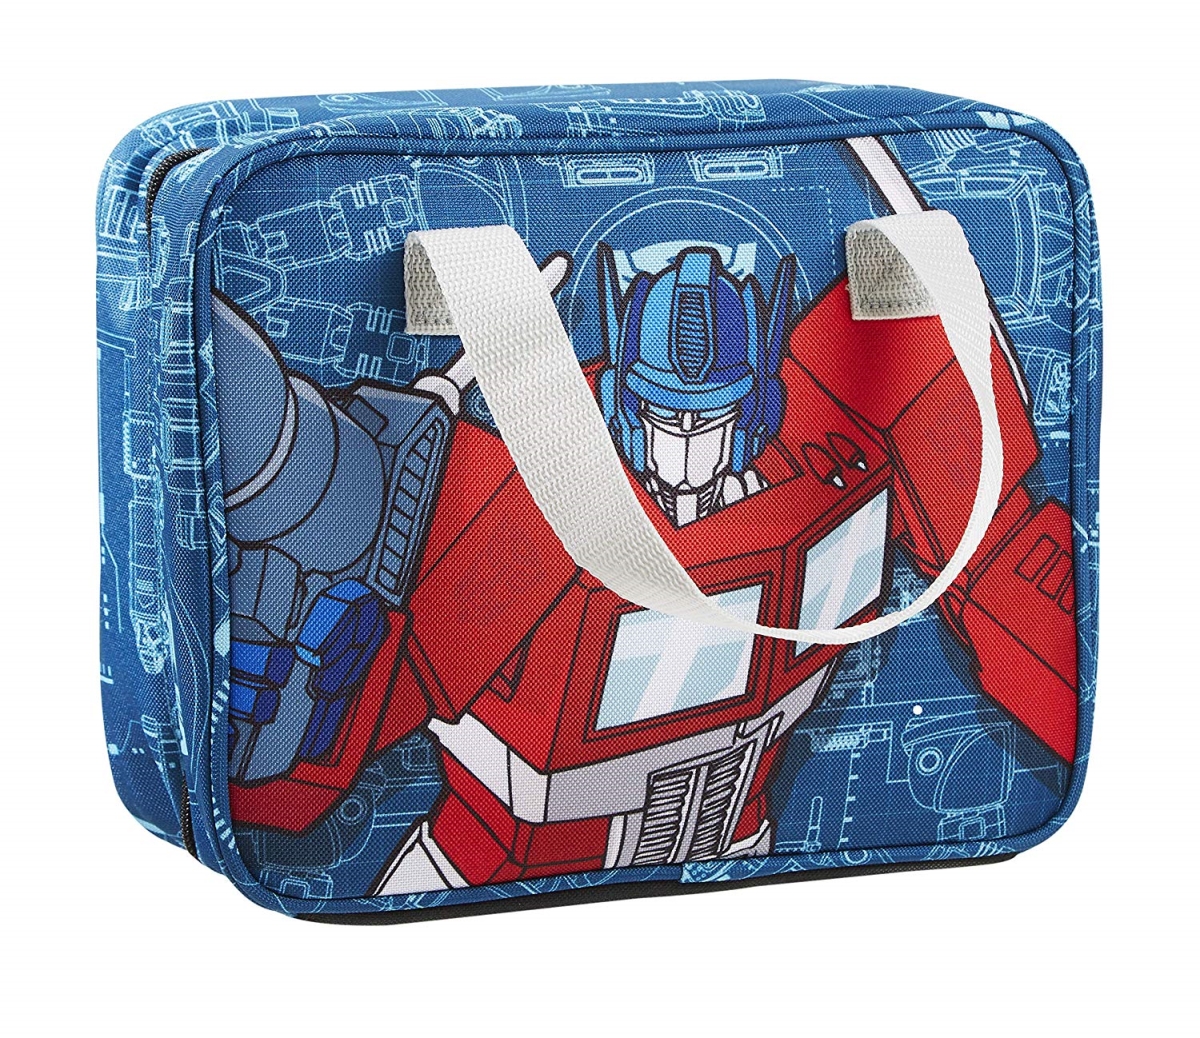 370khas2242 Fit & Fresh Official Transformers Lunch Bag